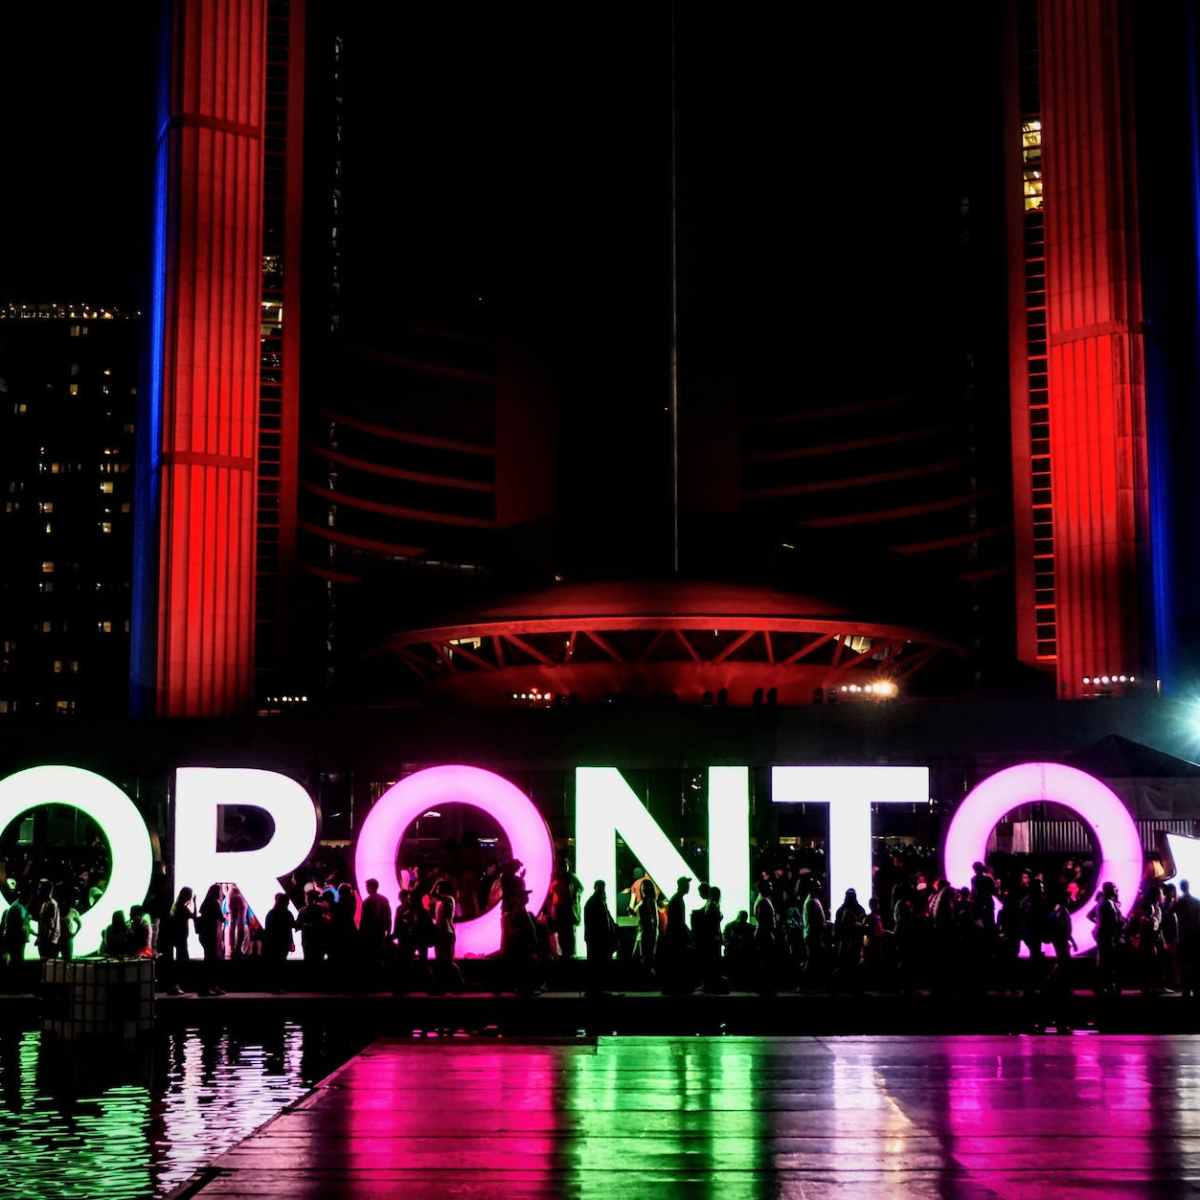 Taylor Swift Eras Tour Concert in Toronto – Downtown Toronto Cheap Hotels Near Rogers Centre